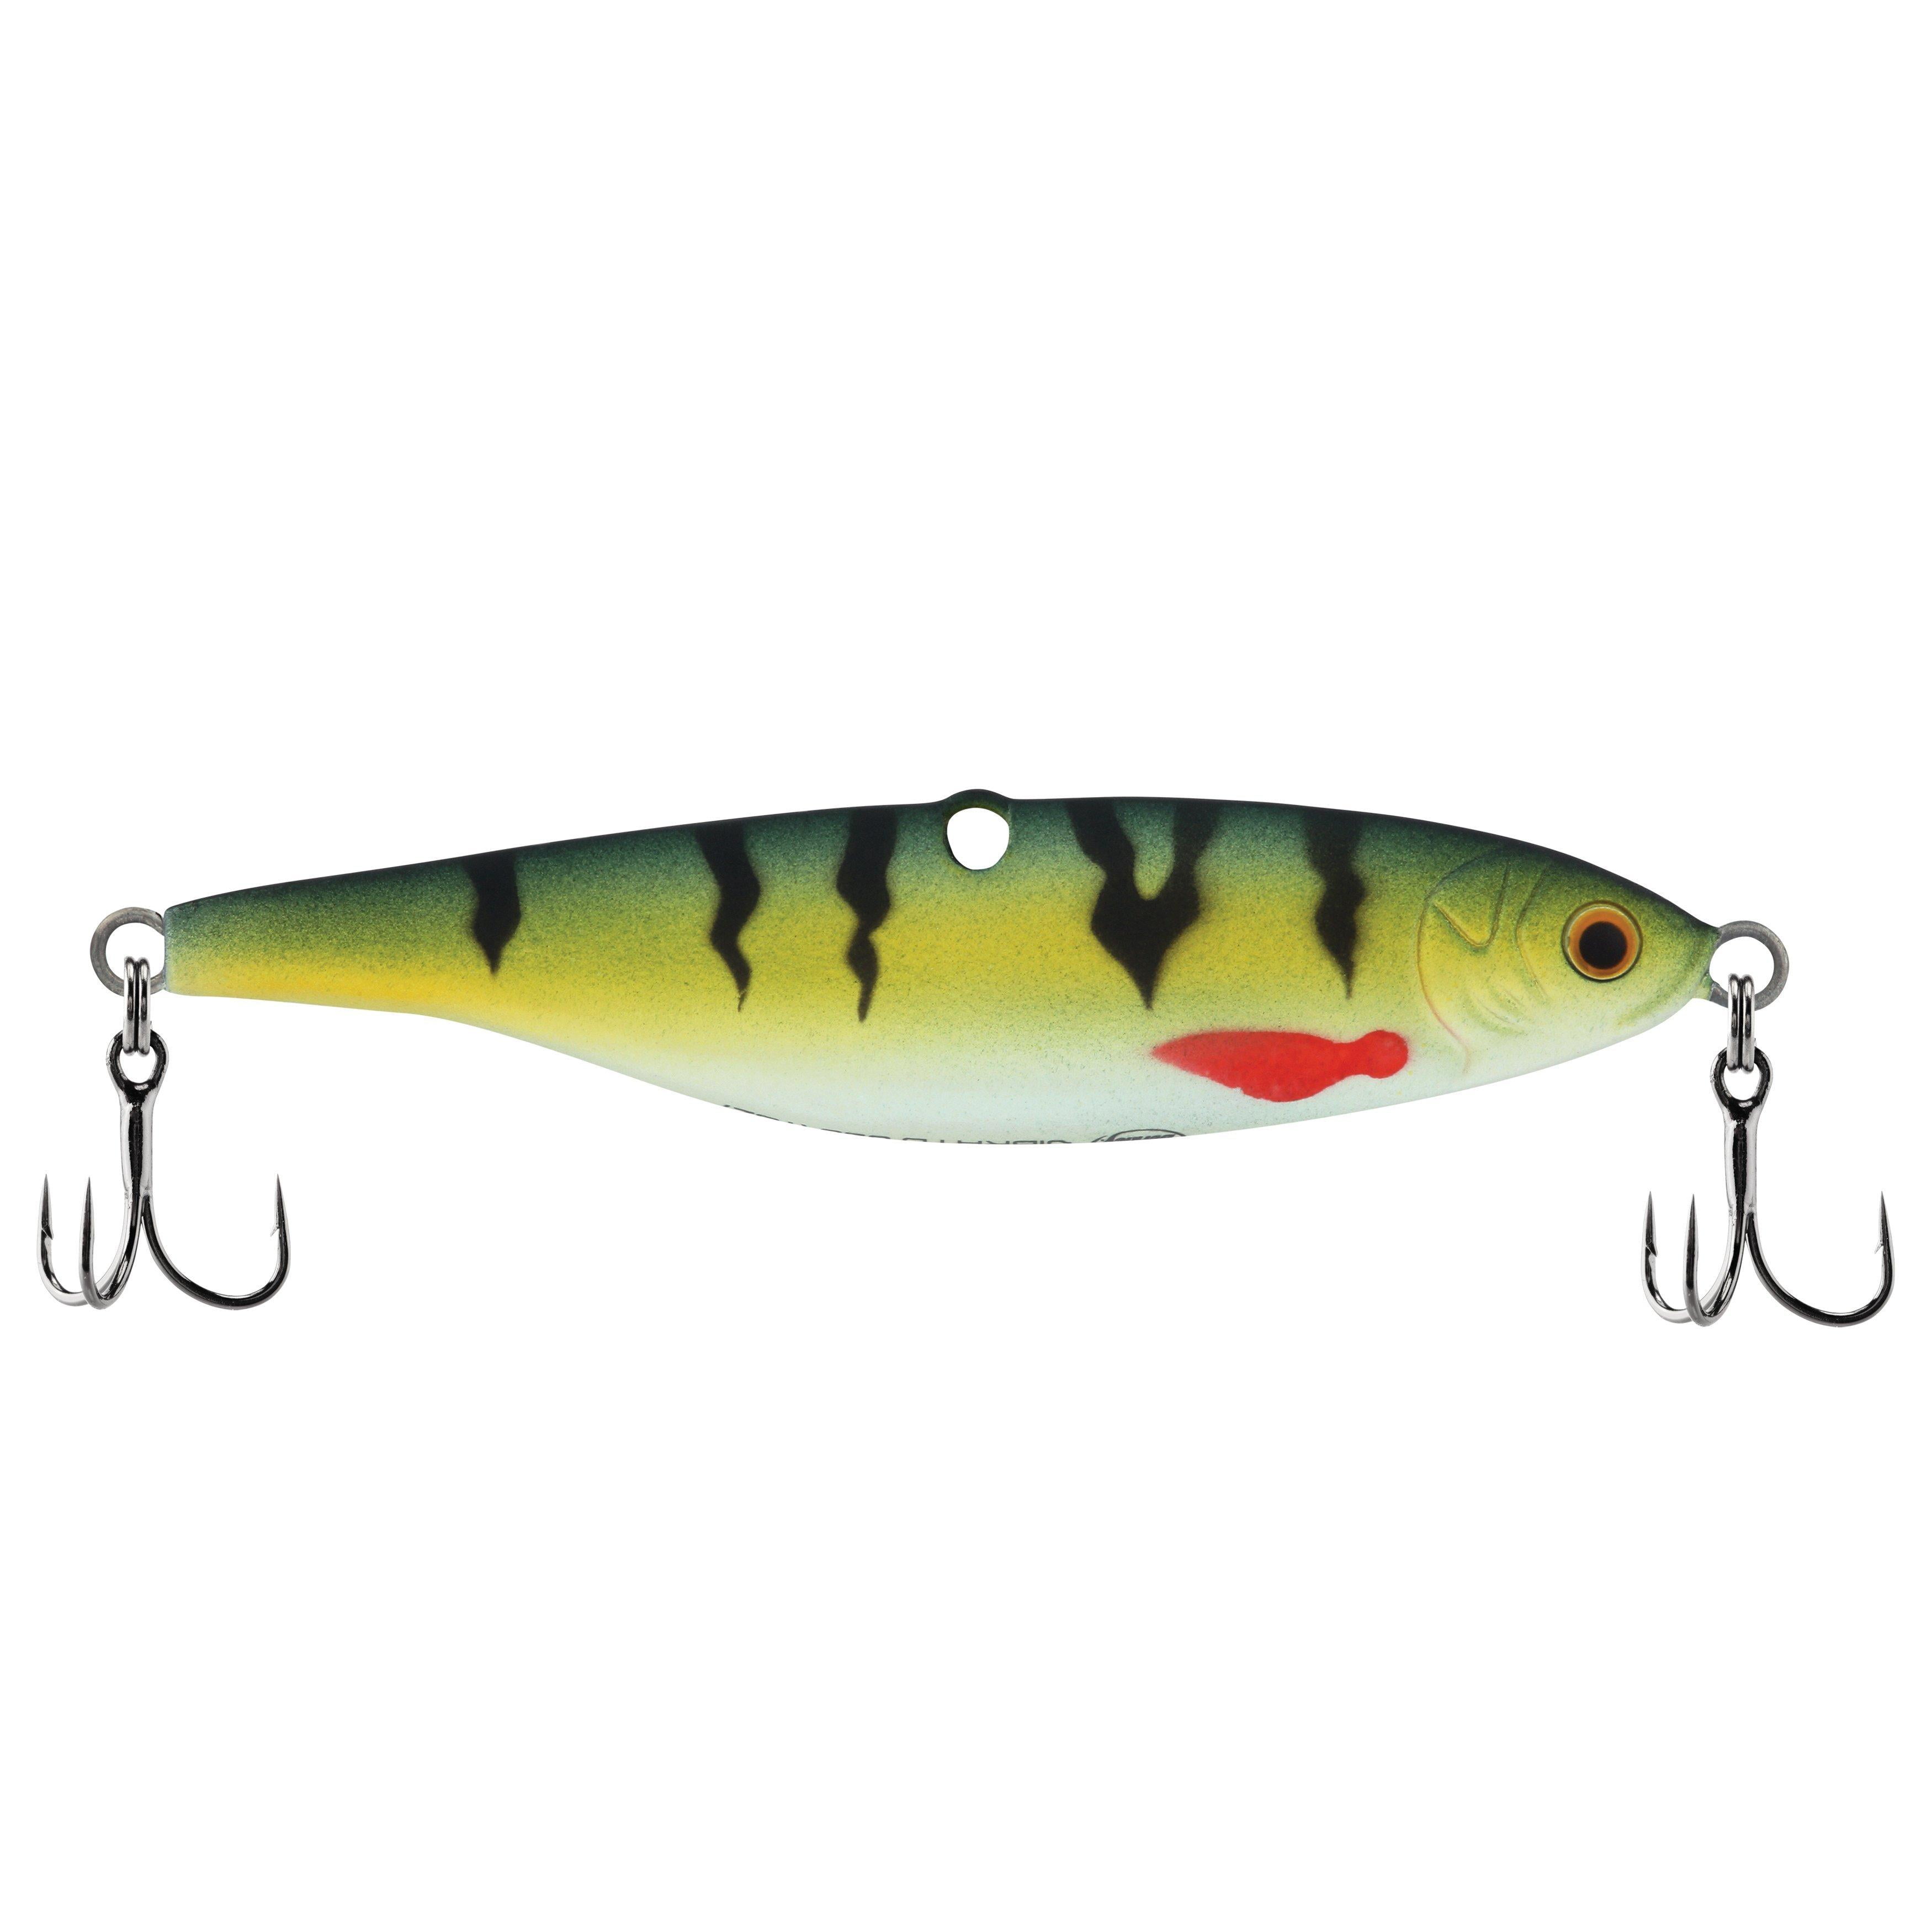 Rapala Saltwater Skitter Pop Topwater Fishing Lure 4.75 1-7/16oz Blue  Chartreuse 